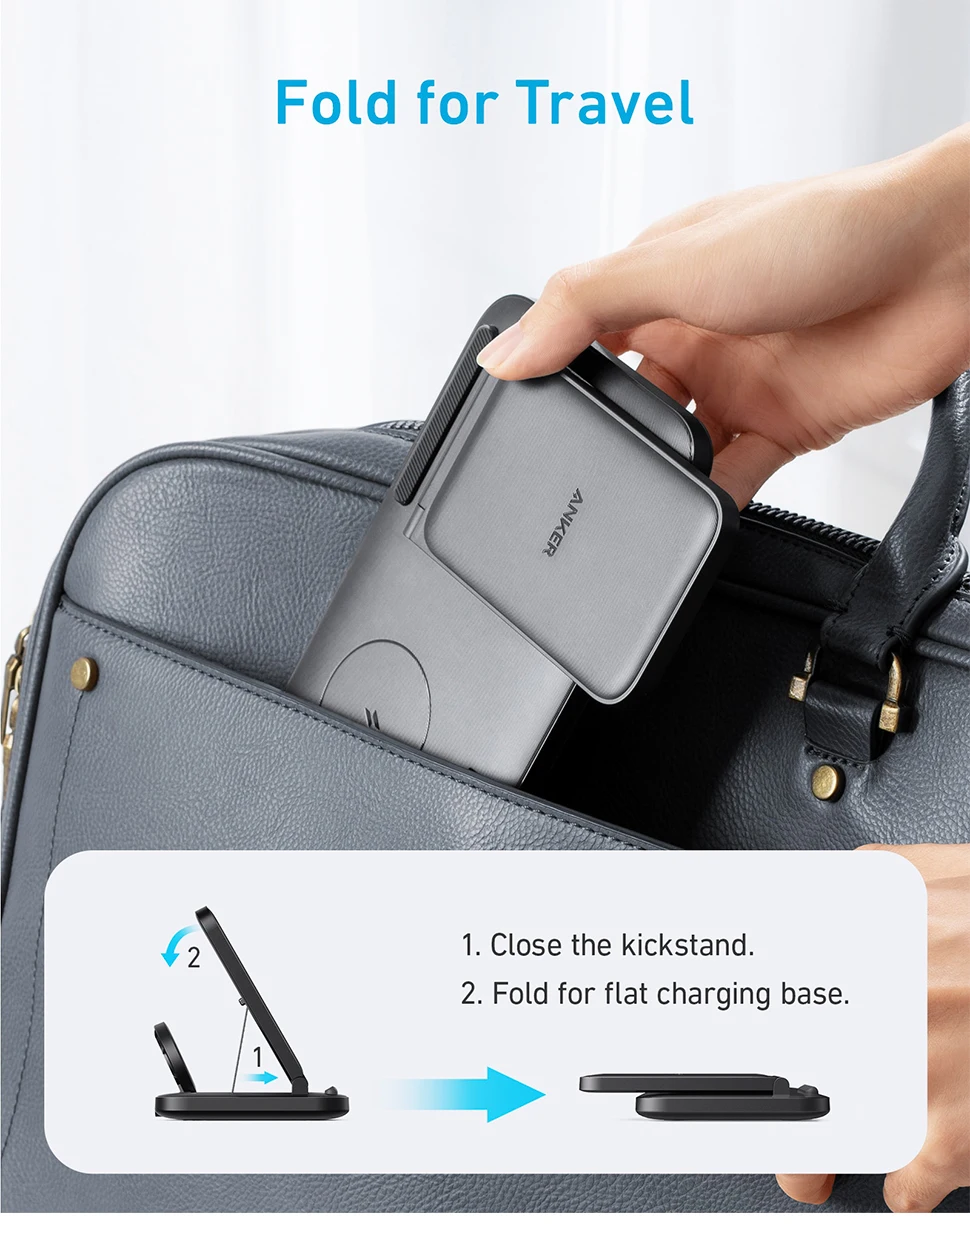 Foldable and Travel friendly Wireless Charger 